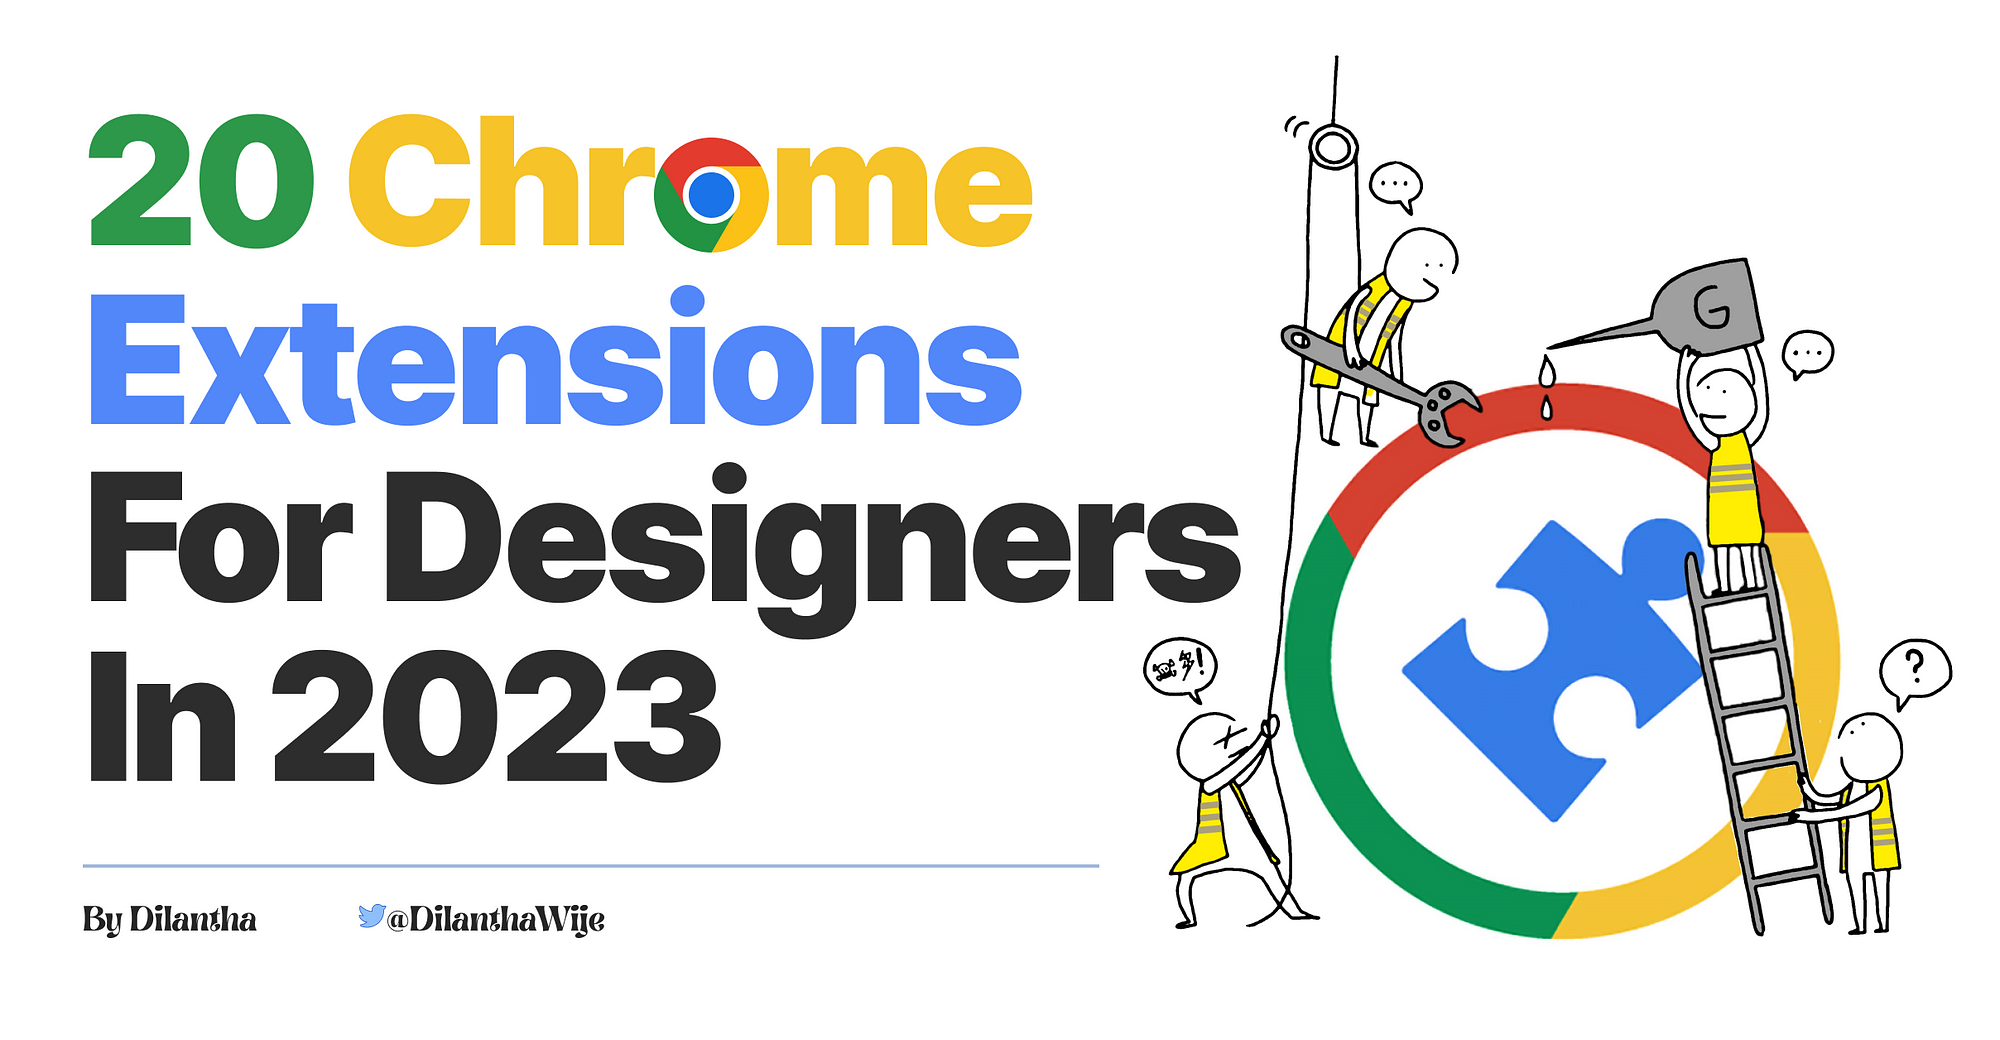 20 Chrome Extensions for Designers in 2023, by Dilantha Wijesinghe, FOSS  NSBM, Oct, 2023